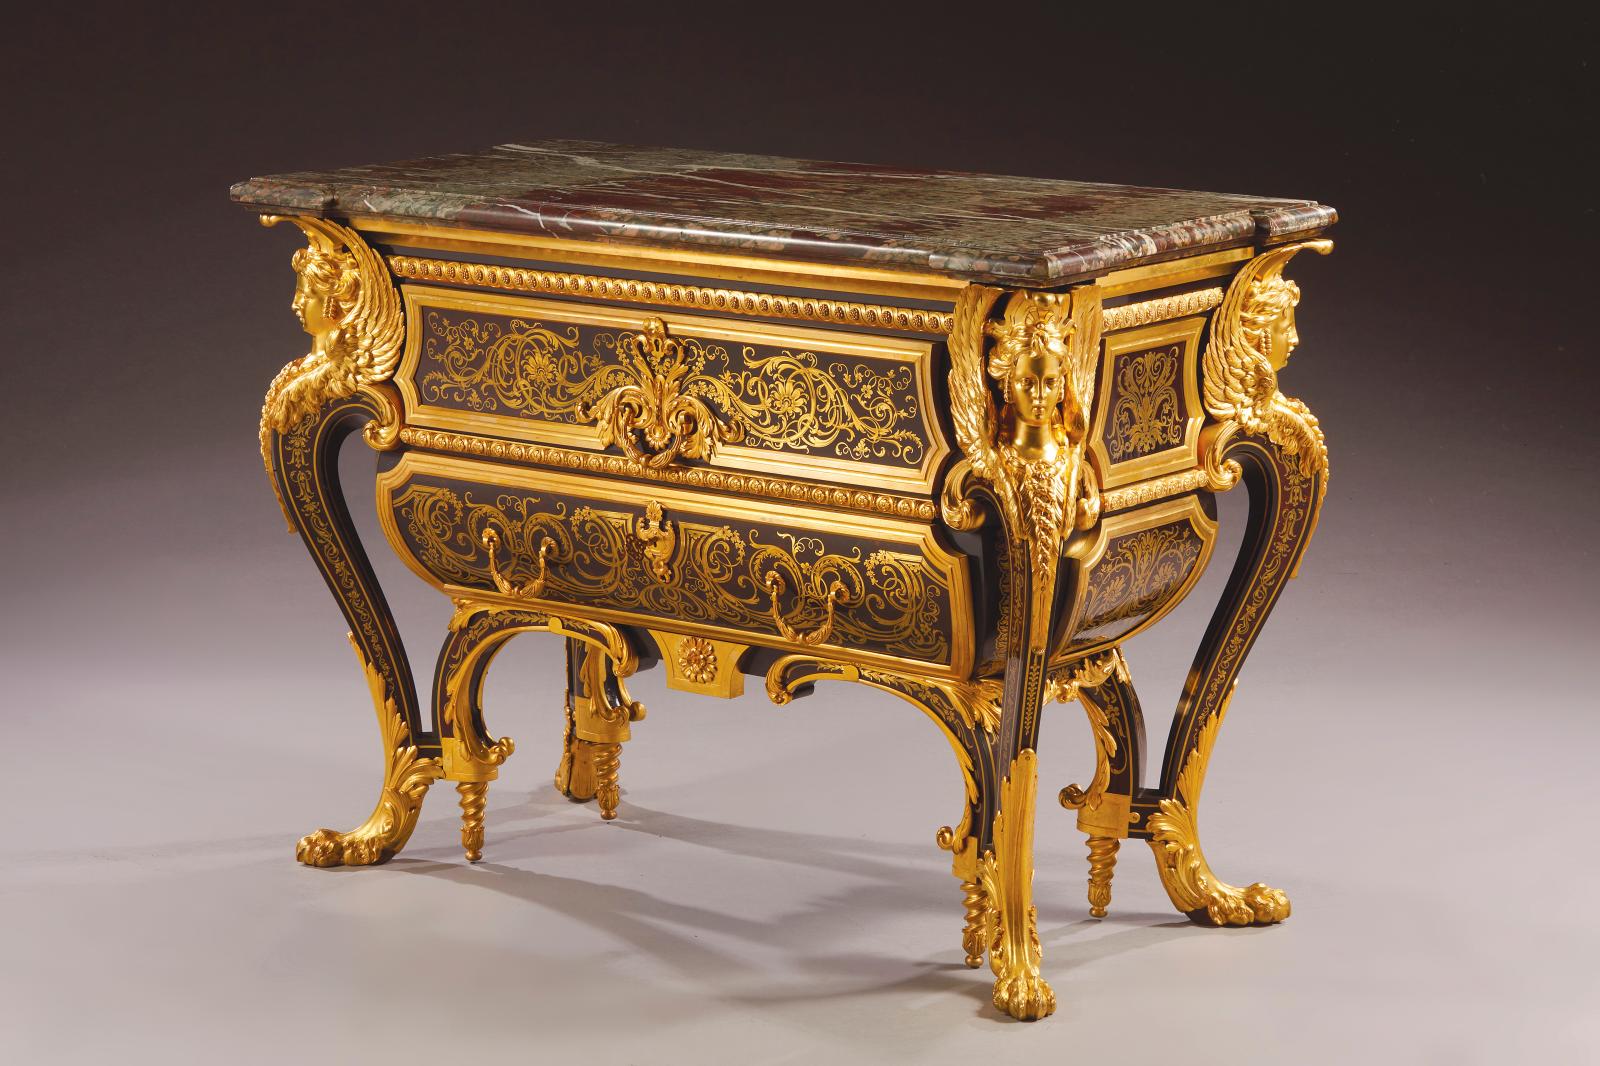 "Blake London", c. 1850. Louis XIV style sarcophagus commode based on the model of André-Charles Boulle, première-partie marquetry on a br